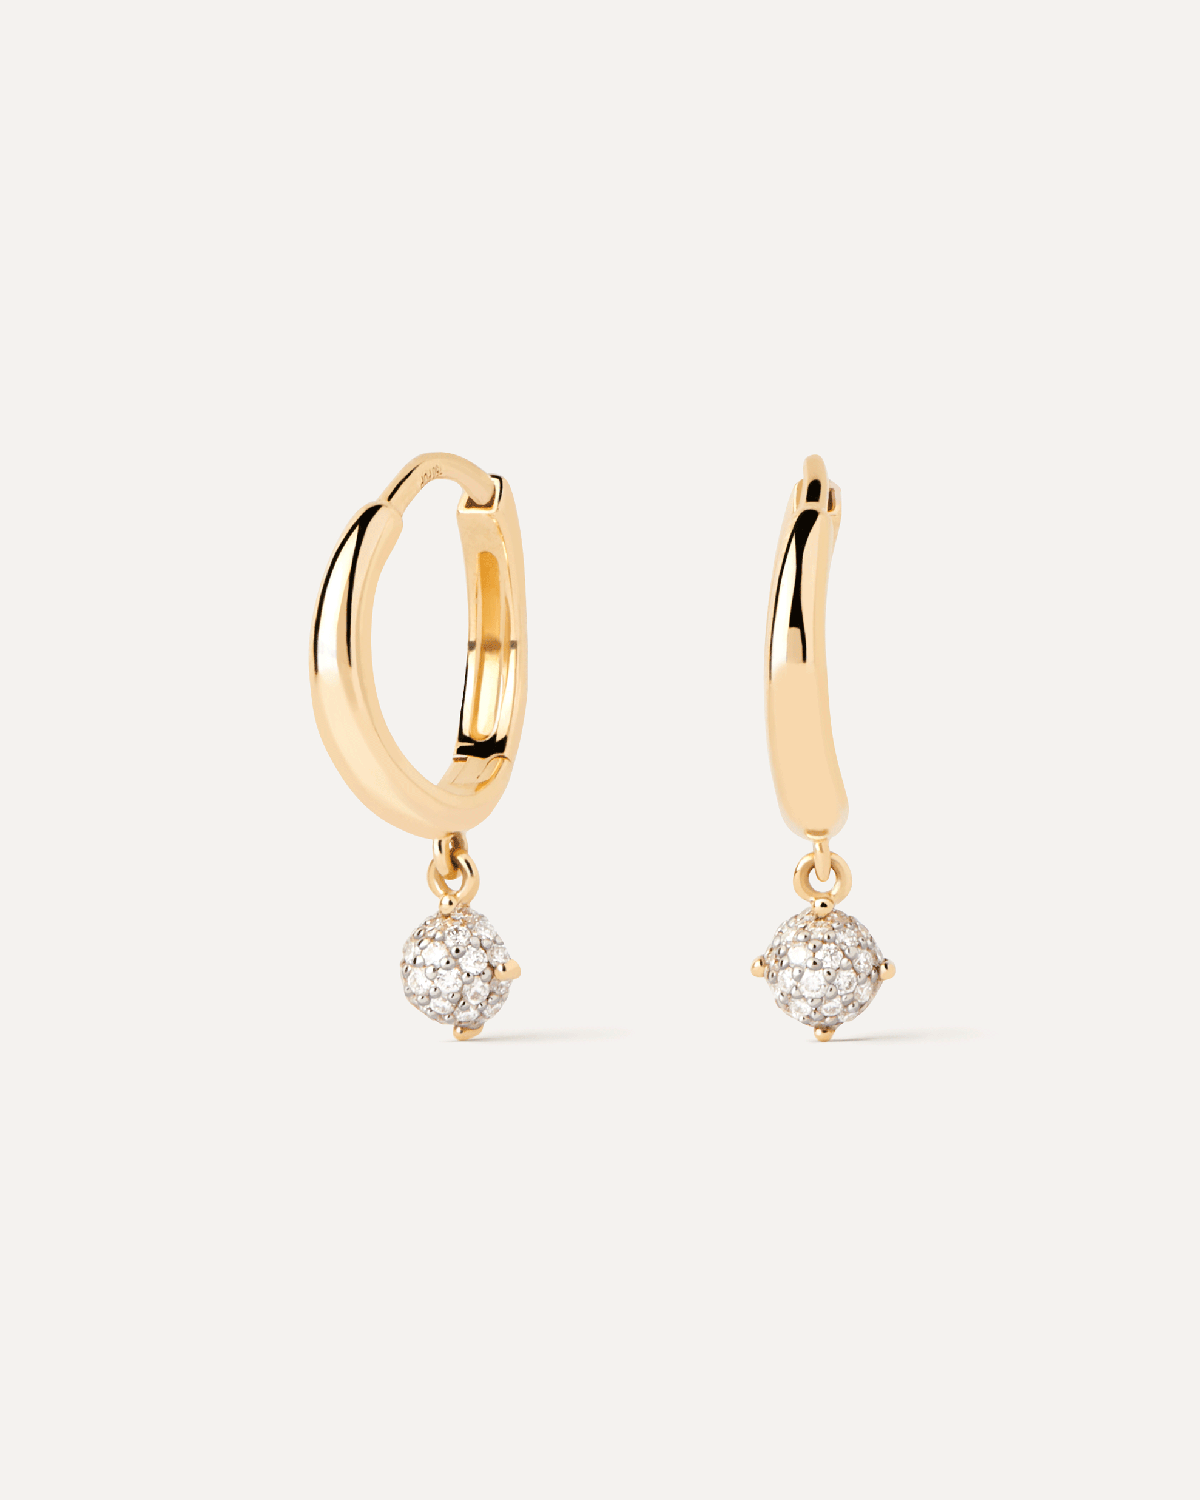 Diamonds and gold Dona hoops. Hoop earrings in solid yellow gold with a small round pavé lab-grown diamond pendant. Get the latest arrival from PDPAOLA. Place your order safely and get this Best Seller.